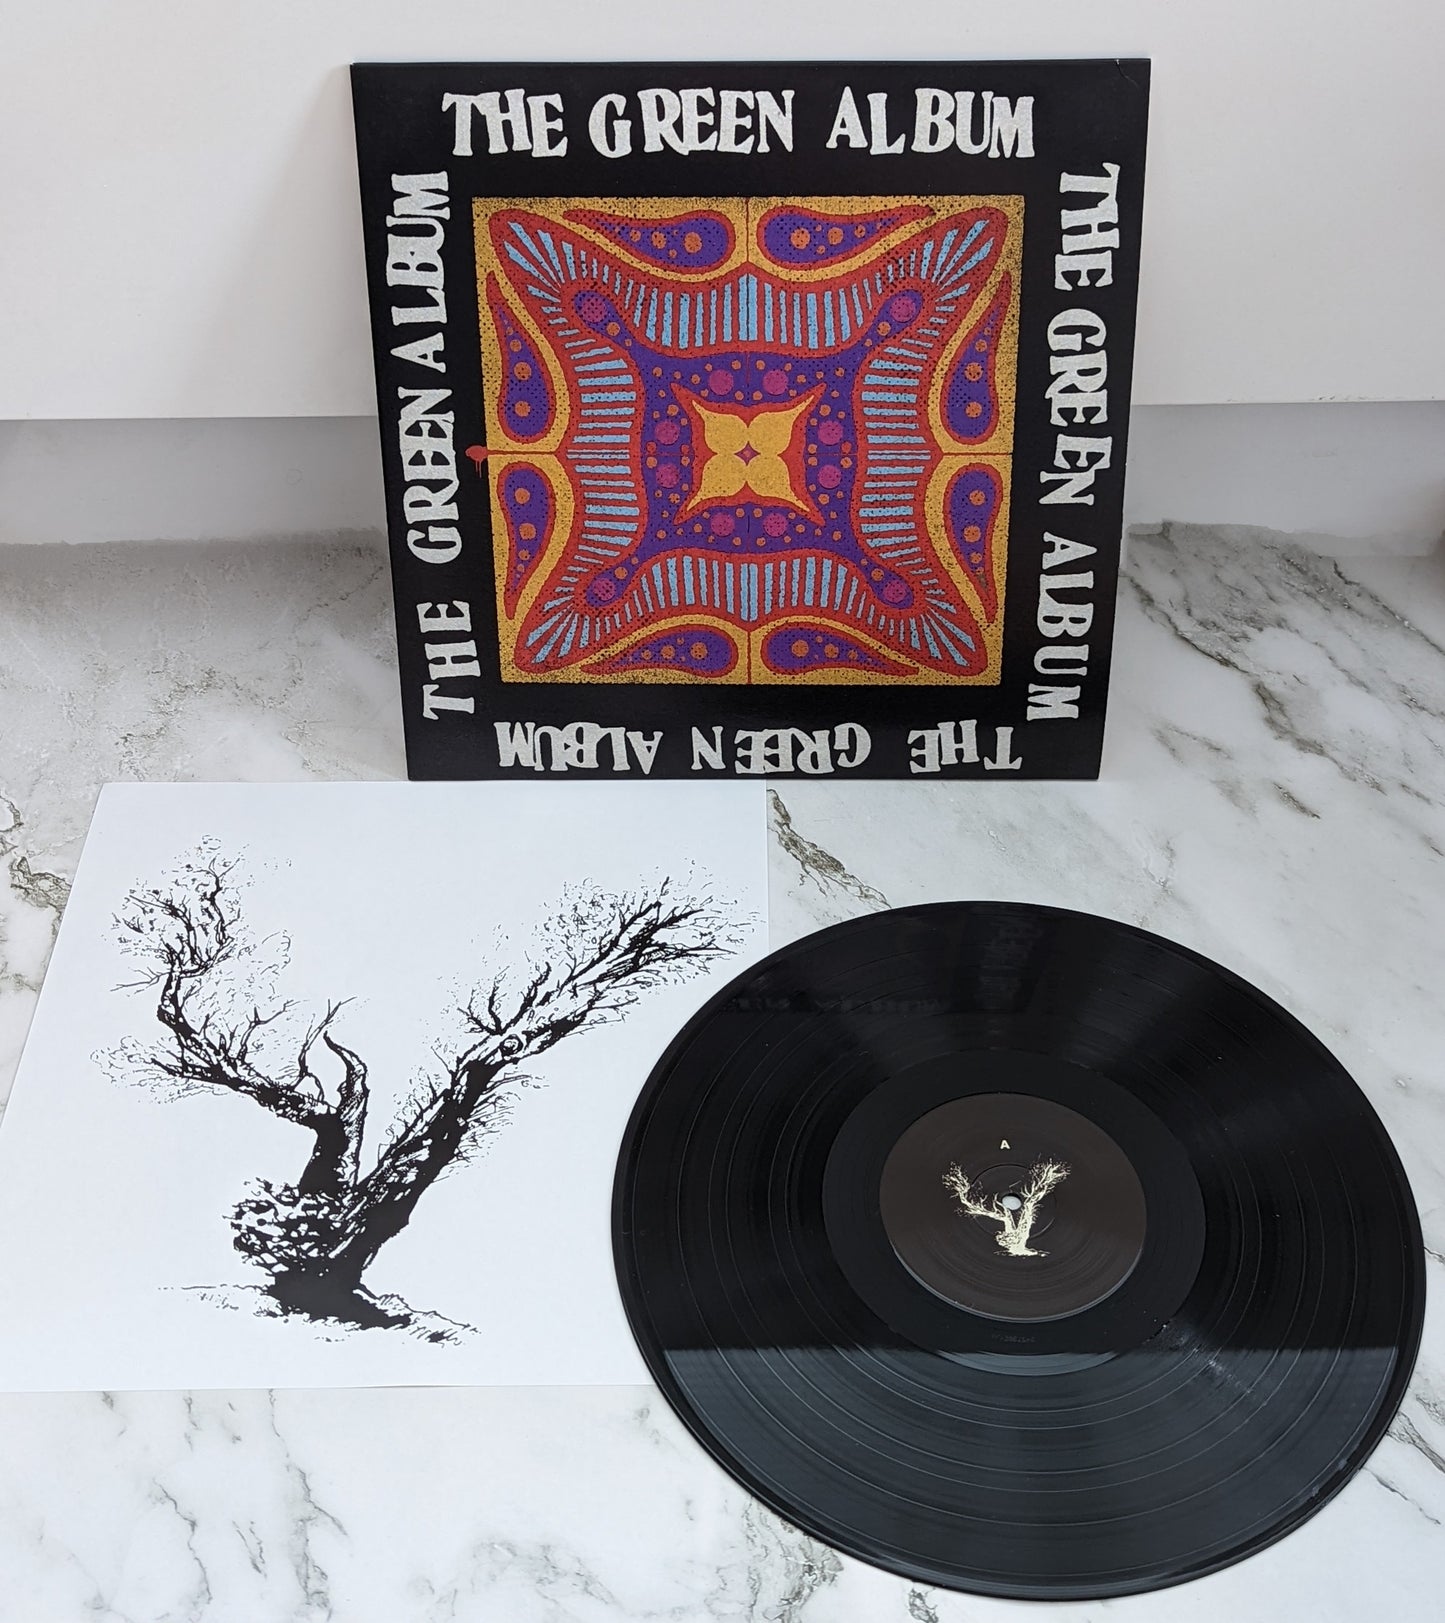 The Green Album [LP] by Yellow Shoots